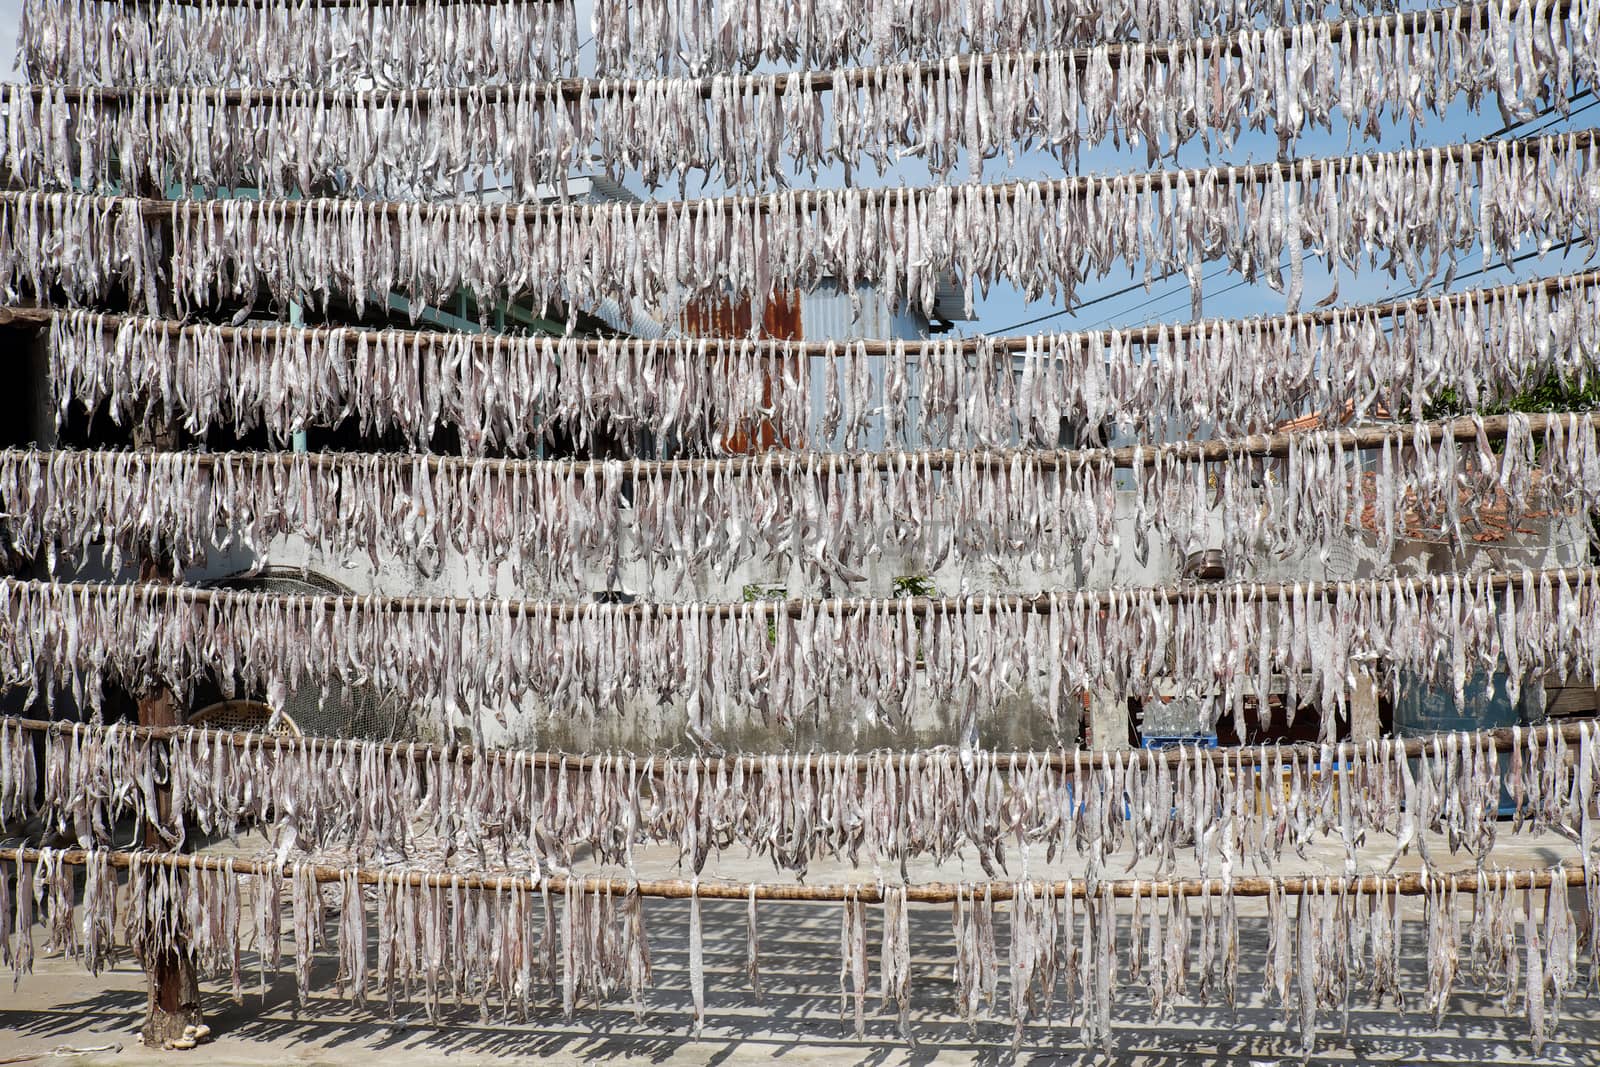 Seafood at Ca Mau fishing village, Mekong Delta, Vietnam. Dried fish is popular Vietnamese food, can store for long time